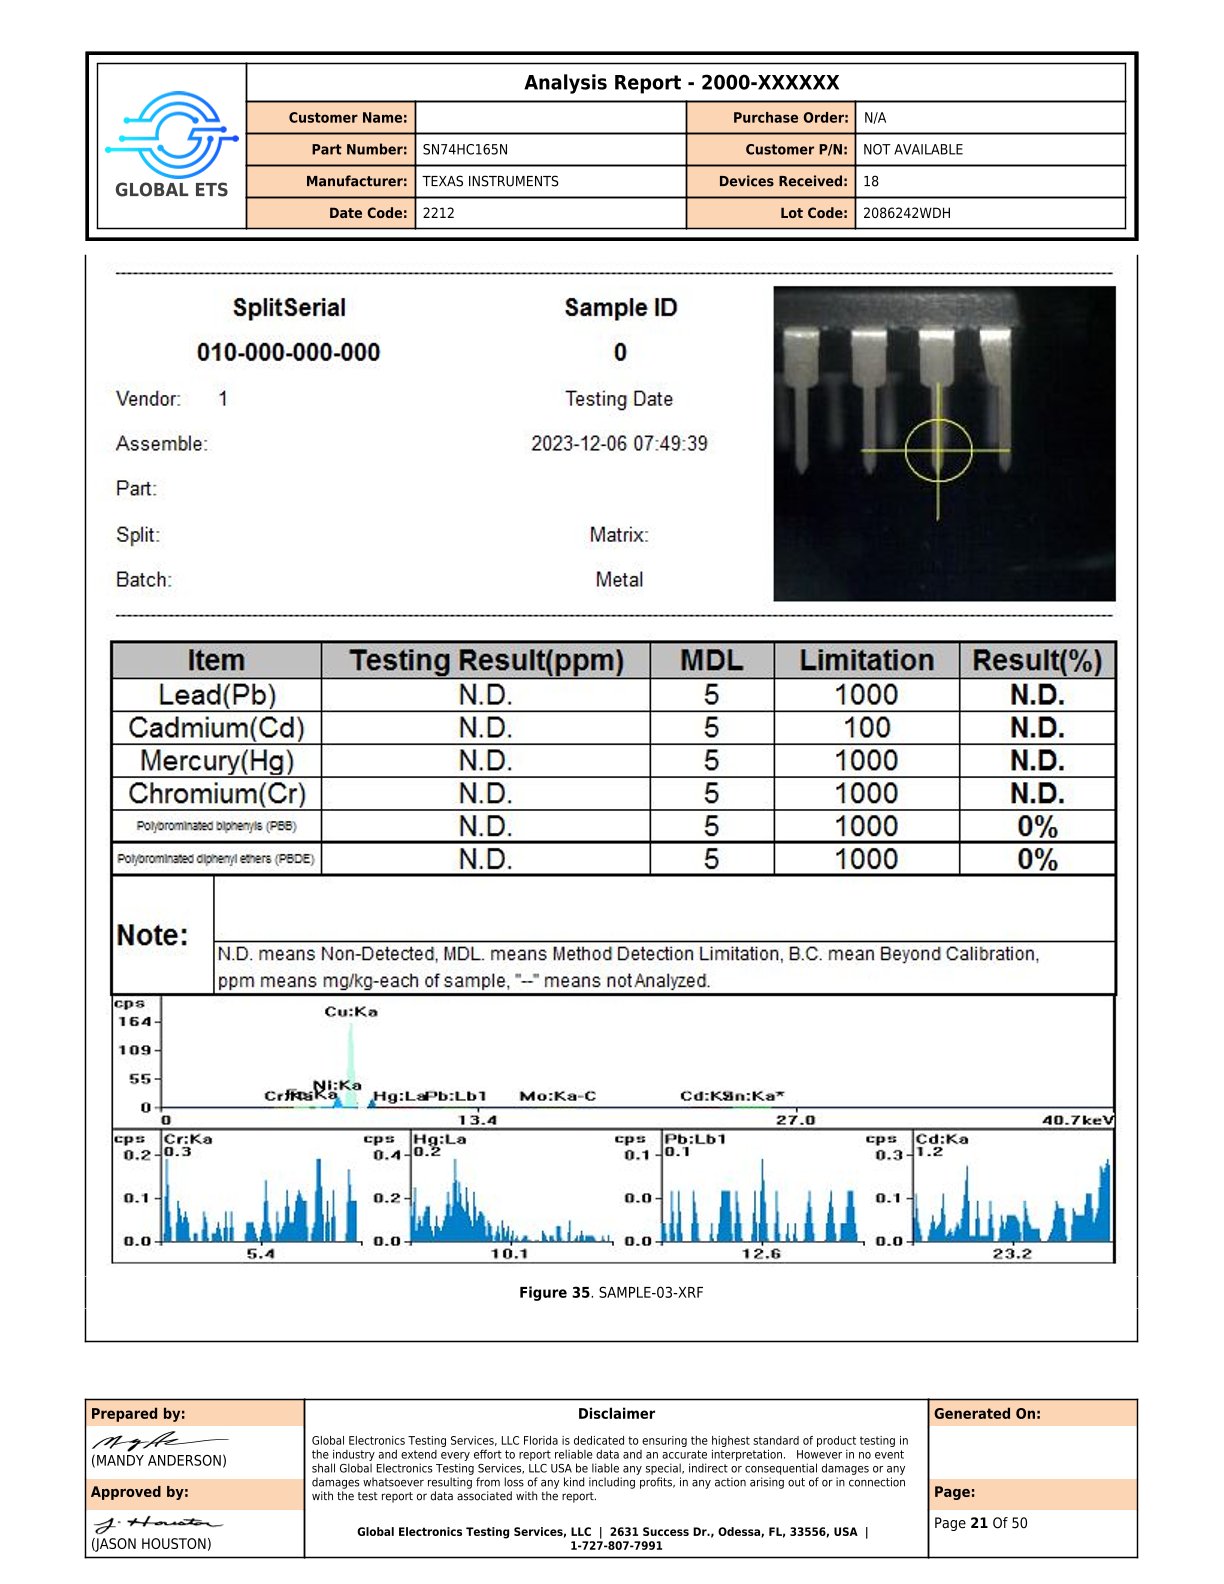 A Global Electronics Testing Services analysis report showing testing results for metals such as Lead, Cadmium, Mercury, and Chromium with N.D. (Not Detected) status along with MDL and limitation values. There is a photo of a sample with a yellow crosshair indicator on the lead of a part and three graphs showing spectrometry peaks at different energy levels in cps.